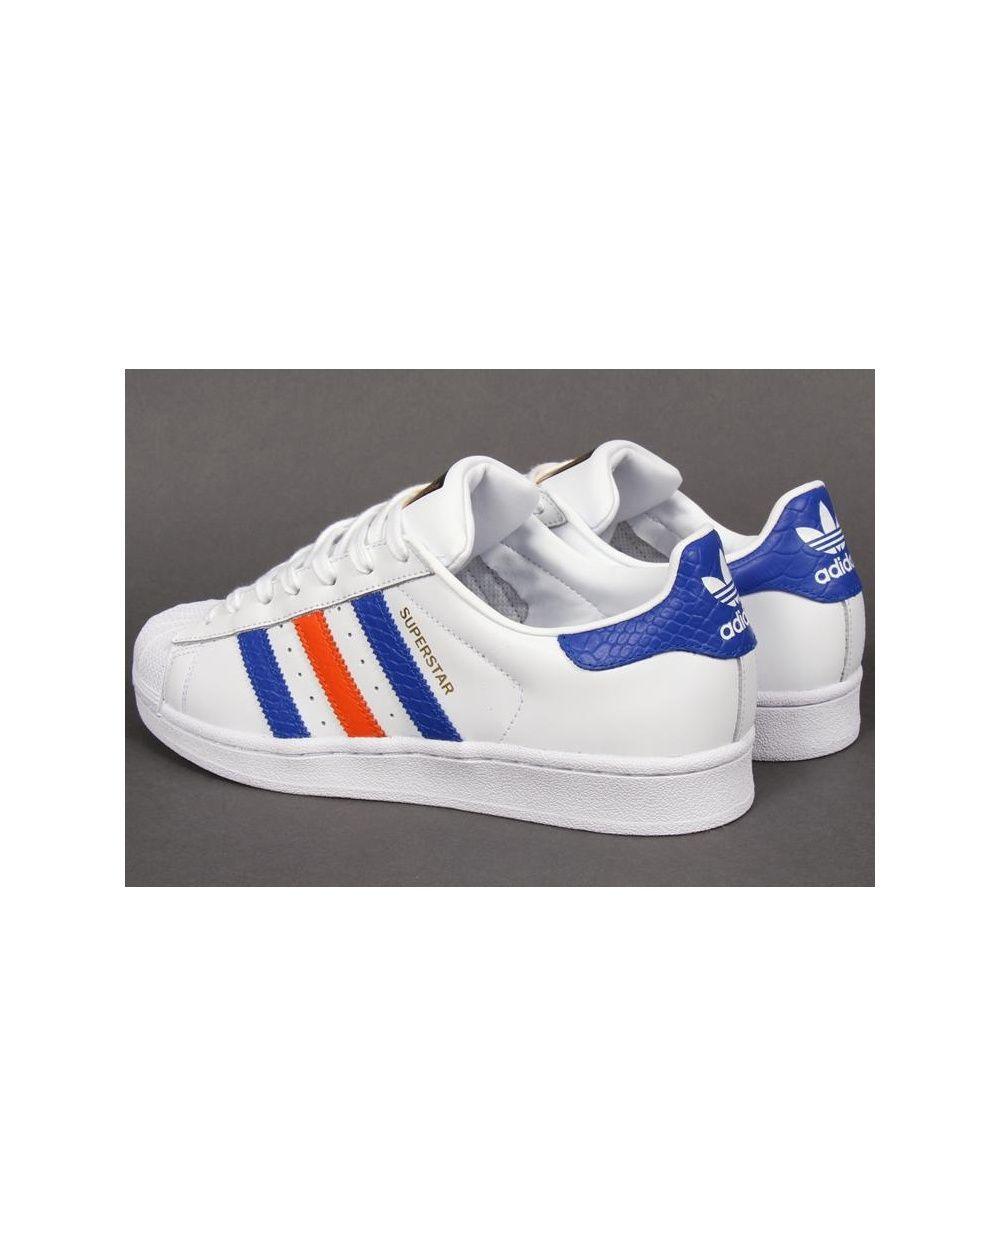 Light Blue Red Orange and Blue Logo - Adidas Superstar Trainers White/blue/red, originals, shell toe shoes ...